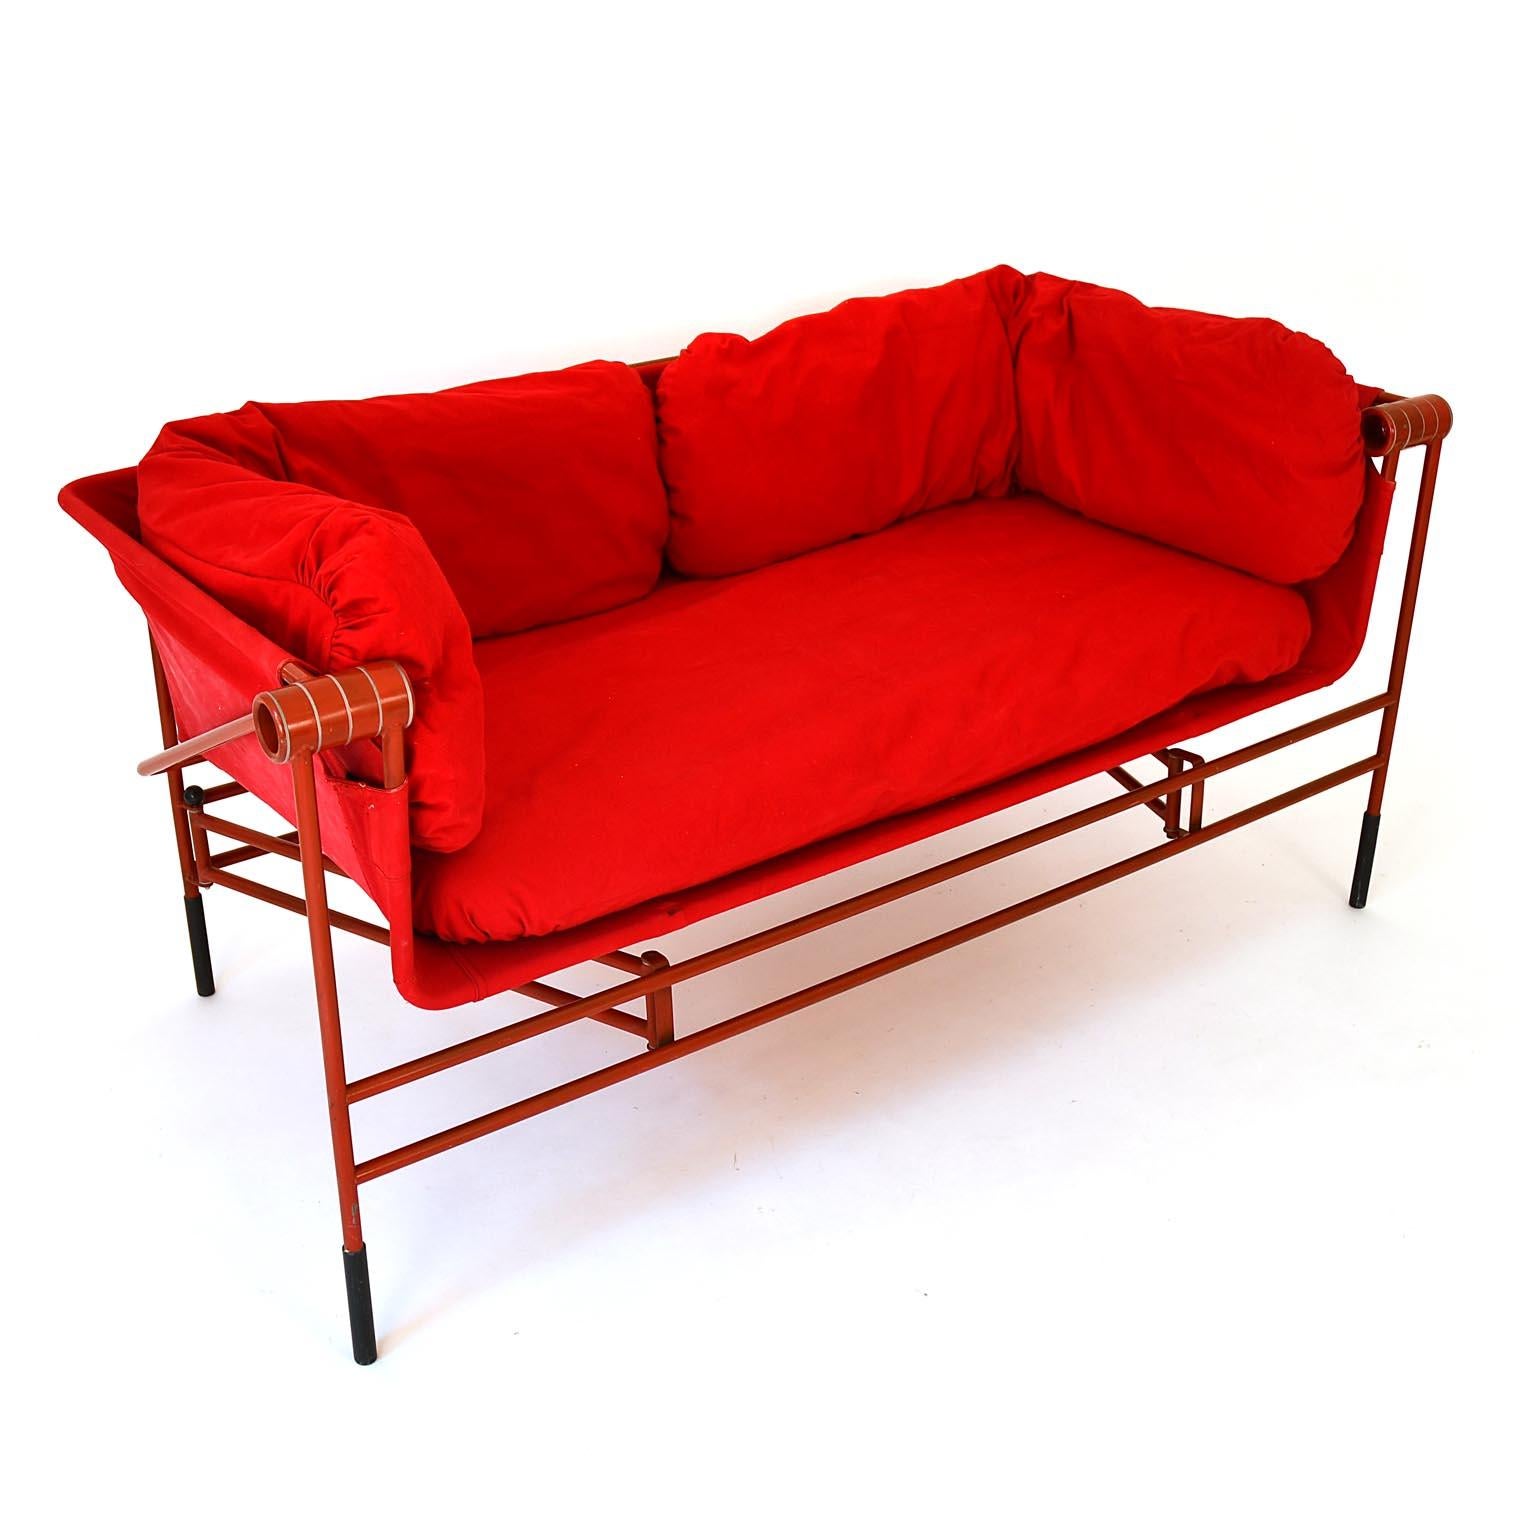 Bench Cabriolet 1980s Red Fabrik Metal Bruno Rota Italy 1